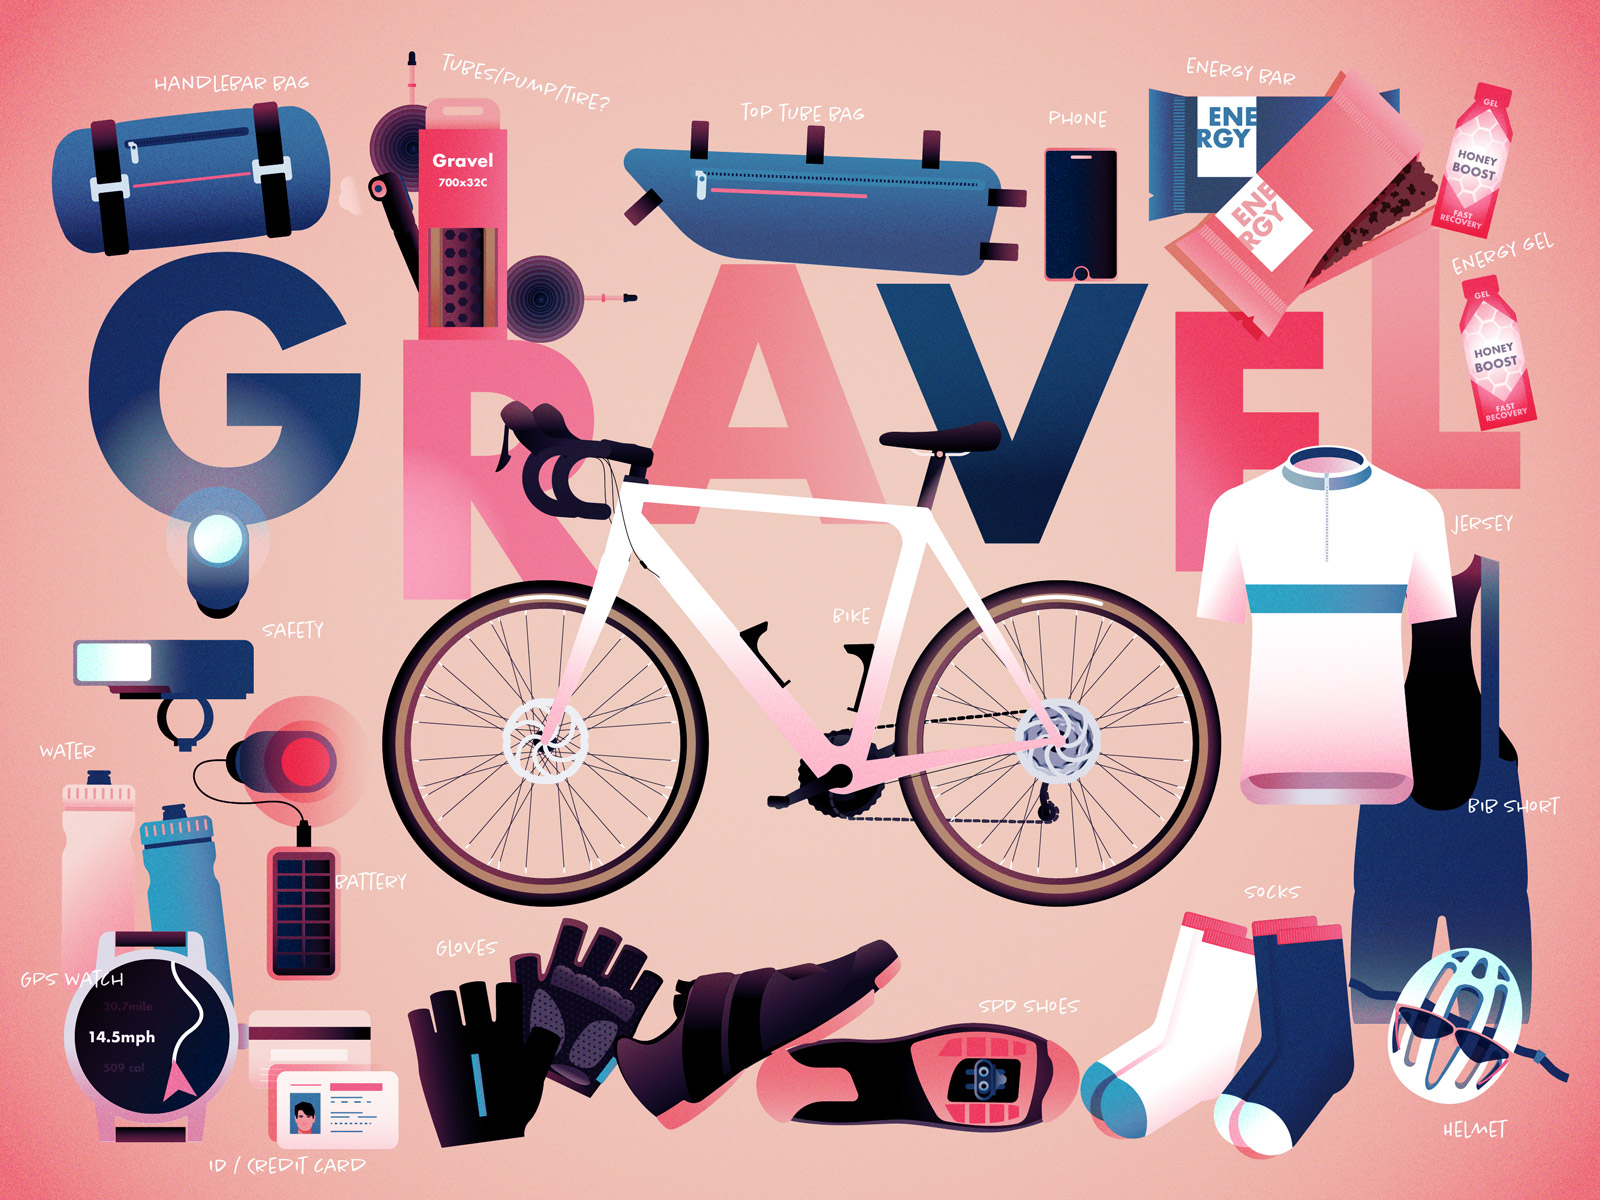 Set up for a short gravel cycling by dongkyu lim on Dribbble